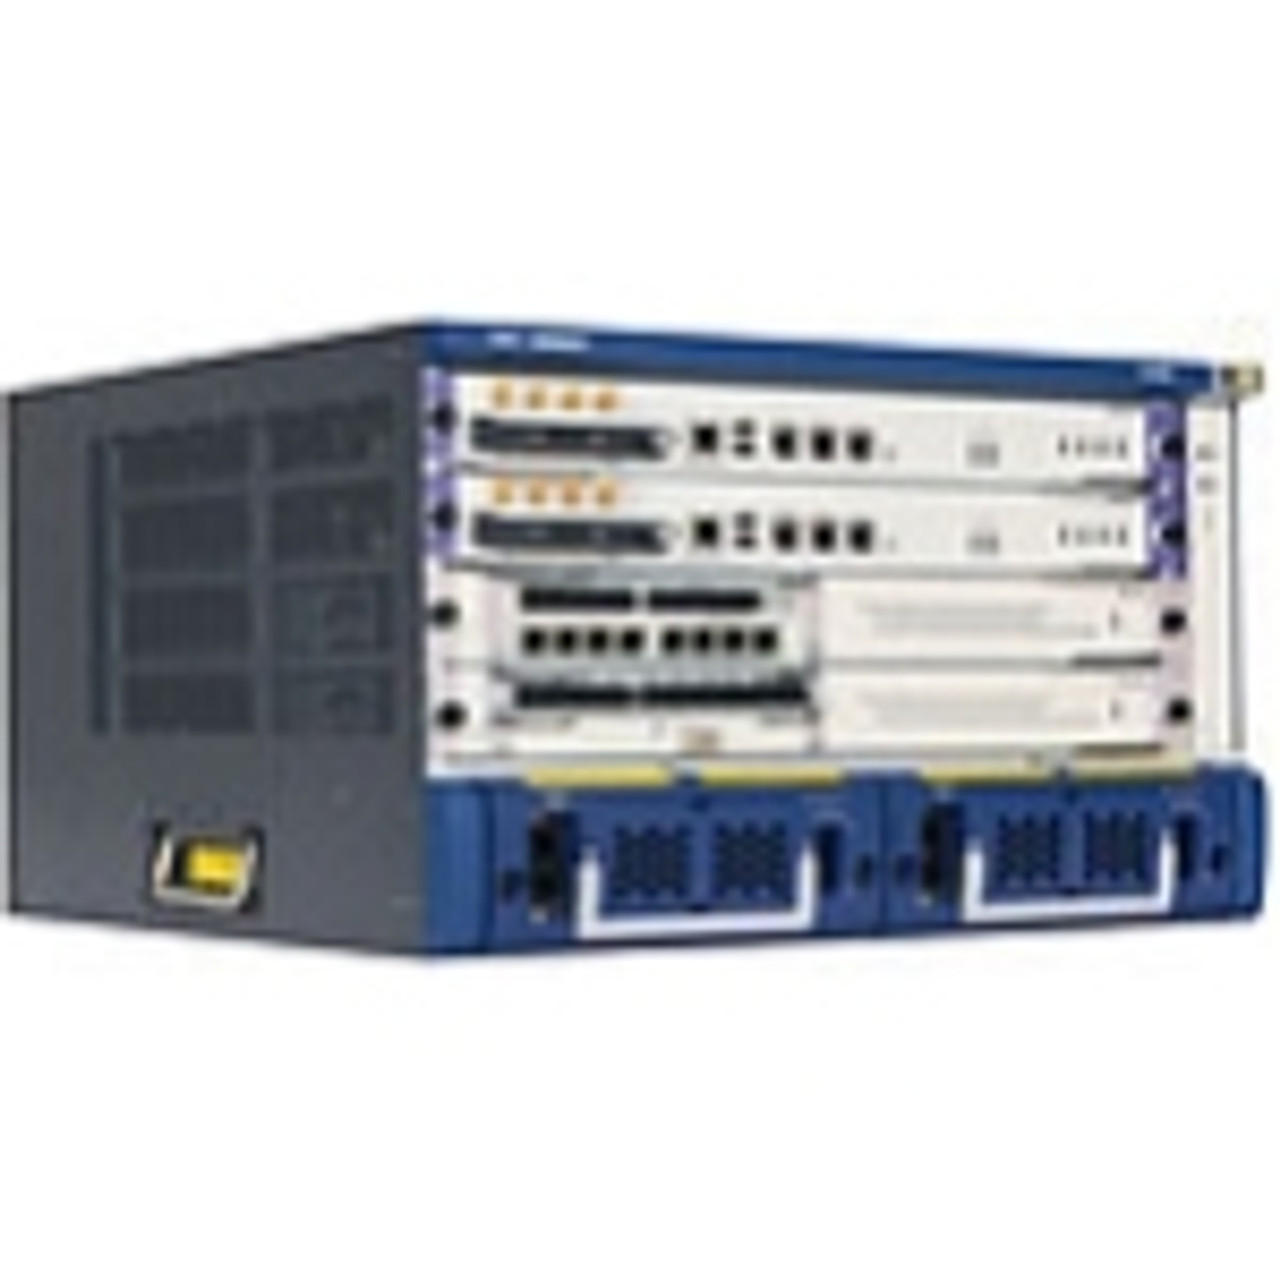 JC147B#ABA HP A8802 Router Chassis